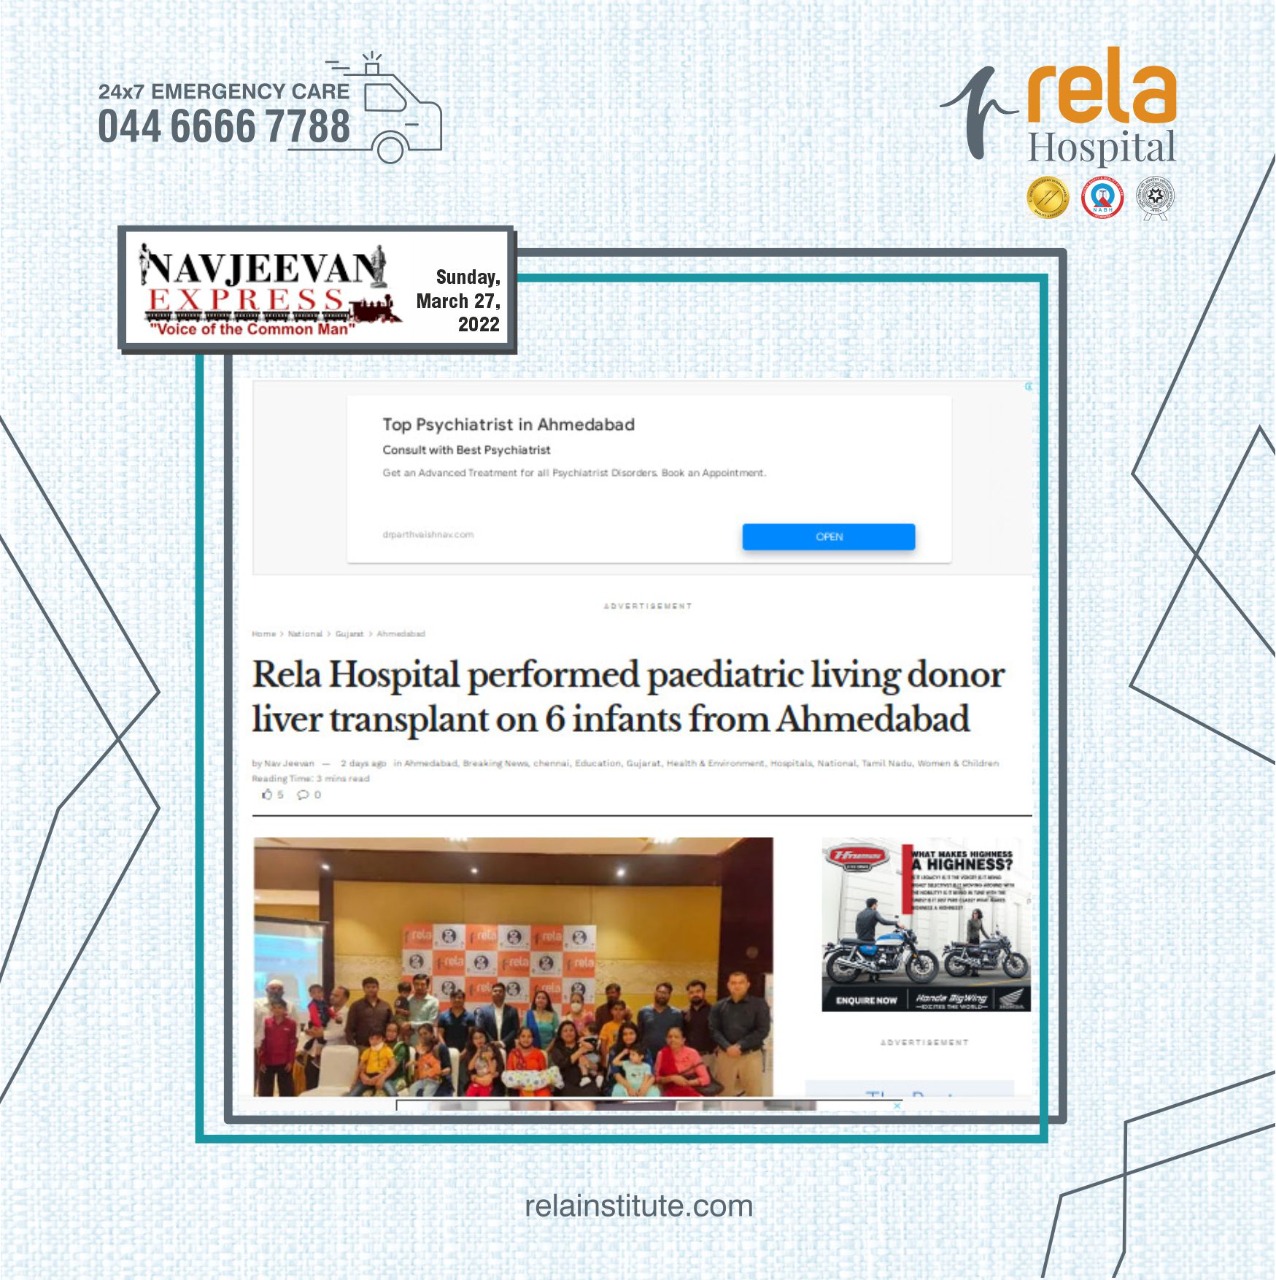 Rela Hospital, Chennai Performs Paediatric Living Donor Liver Transplant On Six Infants In Ahmedaba